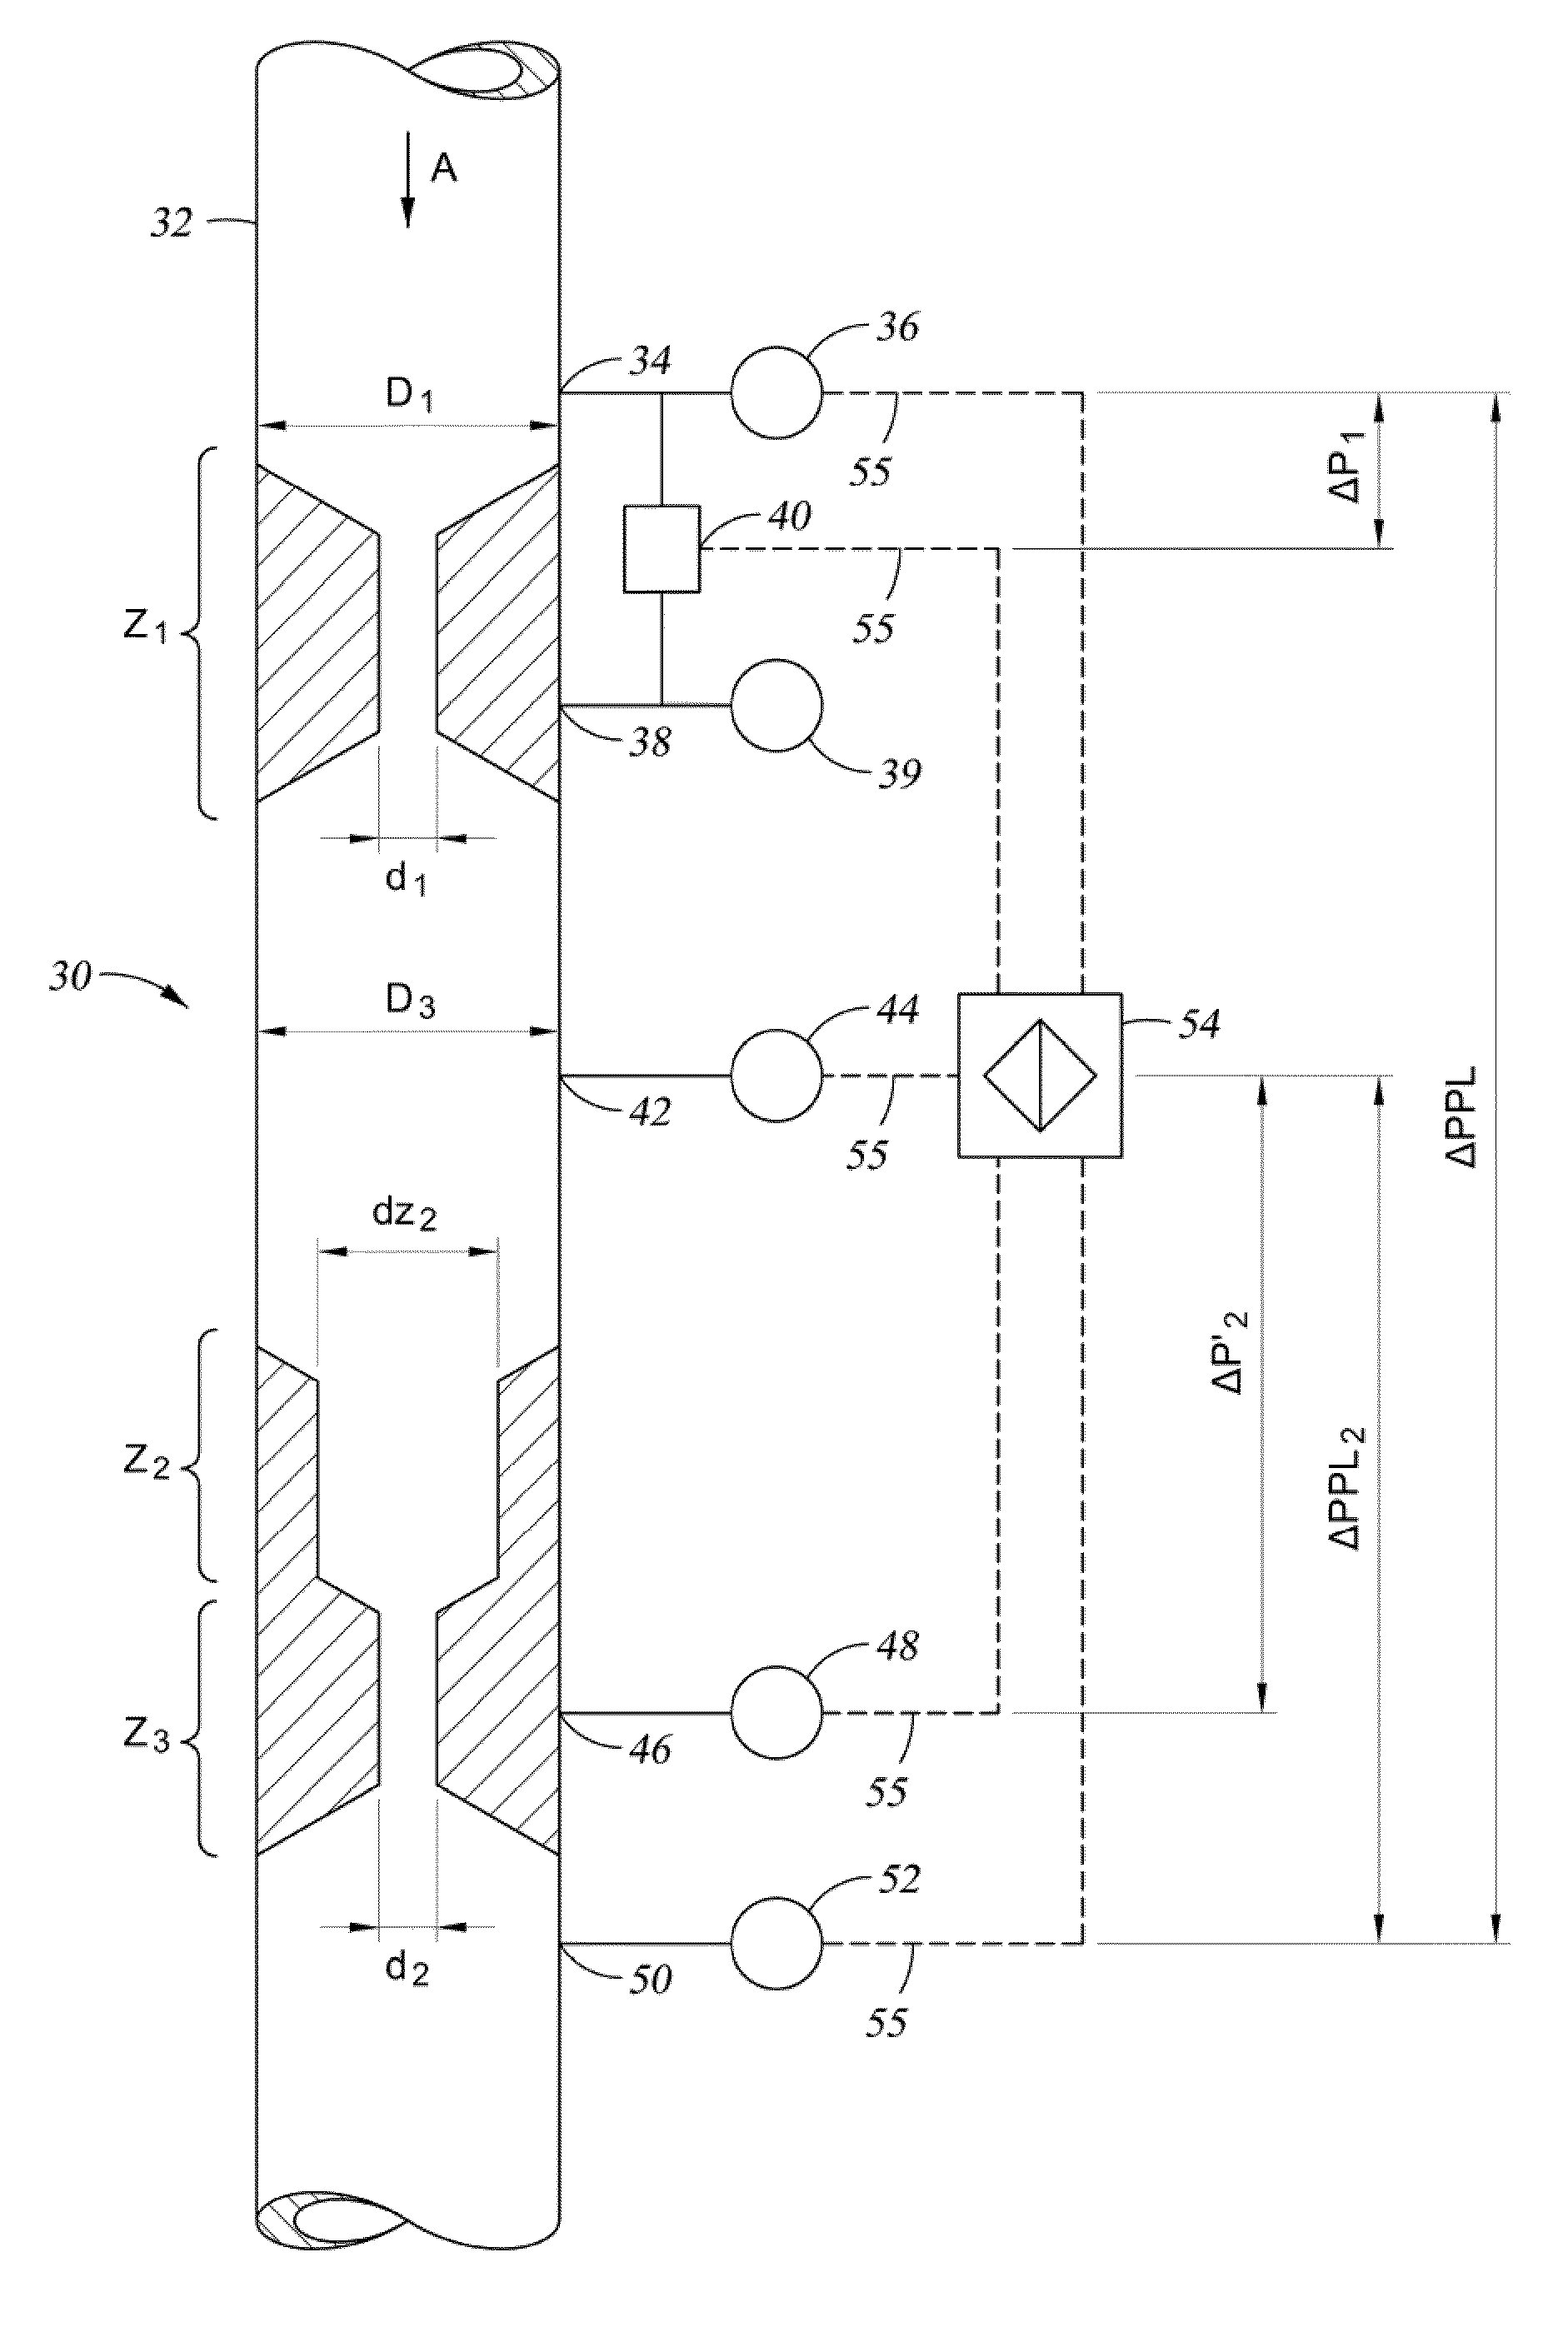 Method of measuring multiphase flow using a multi-stage flow meter